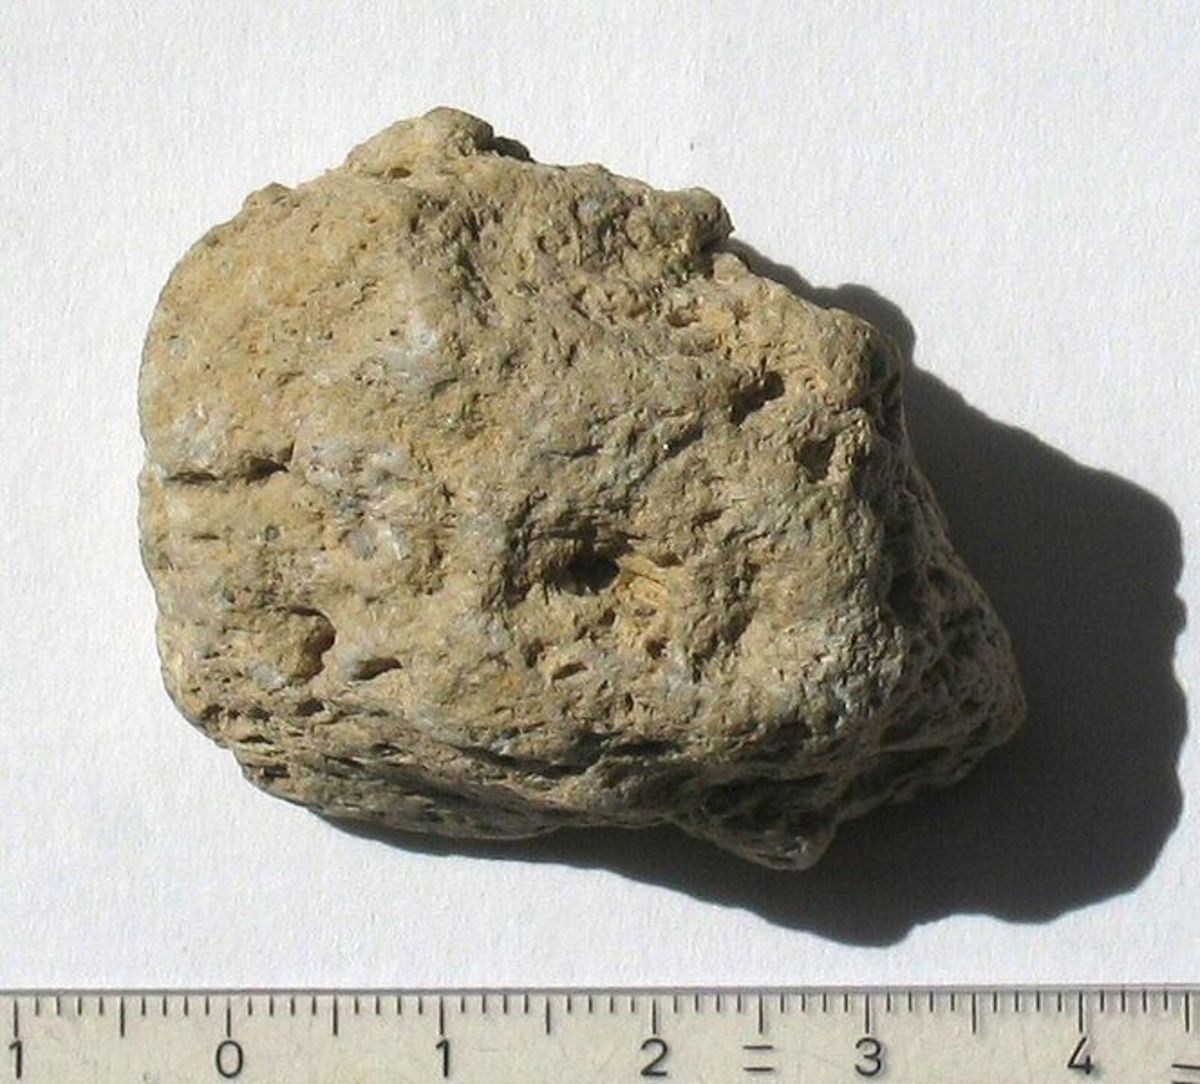 A sample of natural pumice stone from Greece